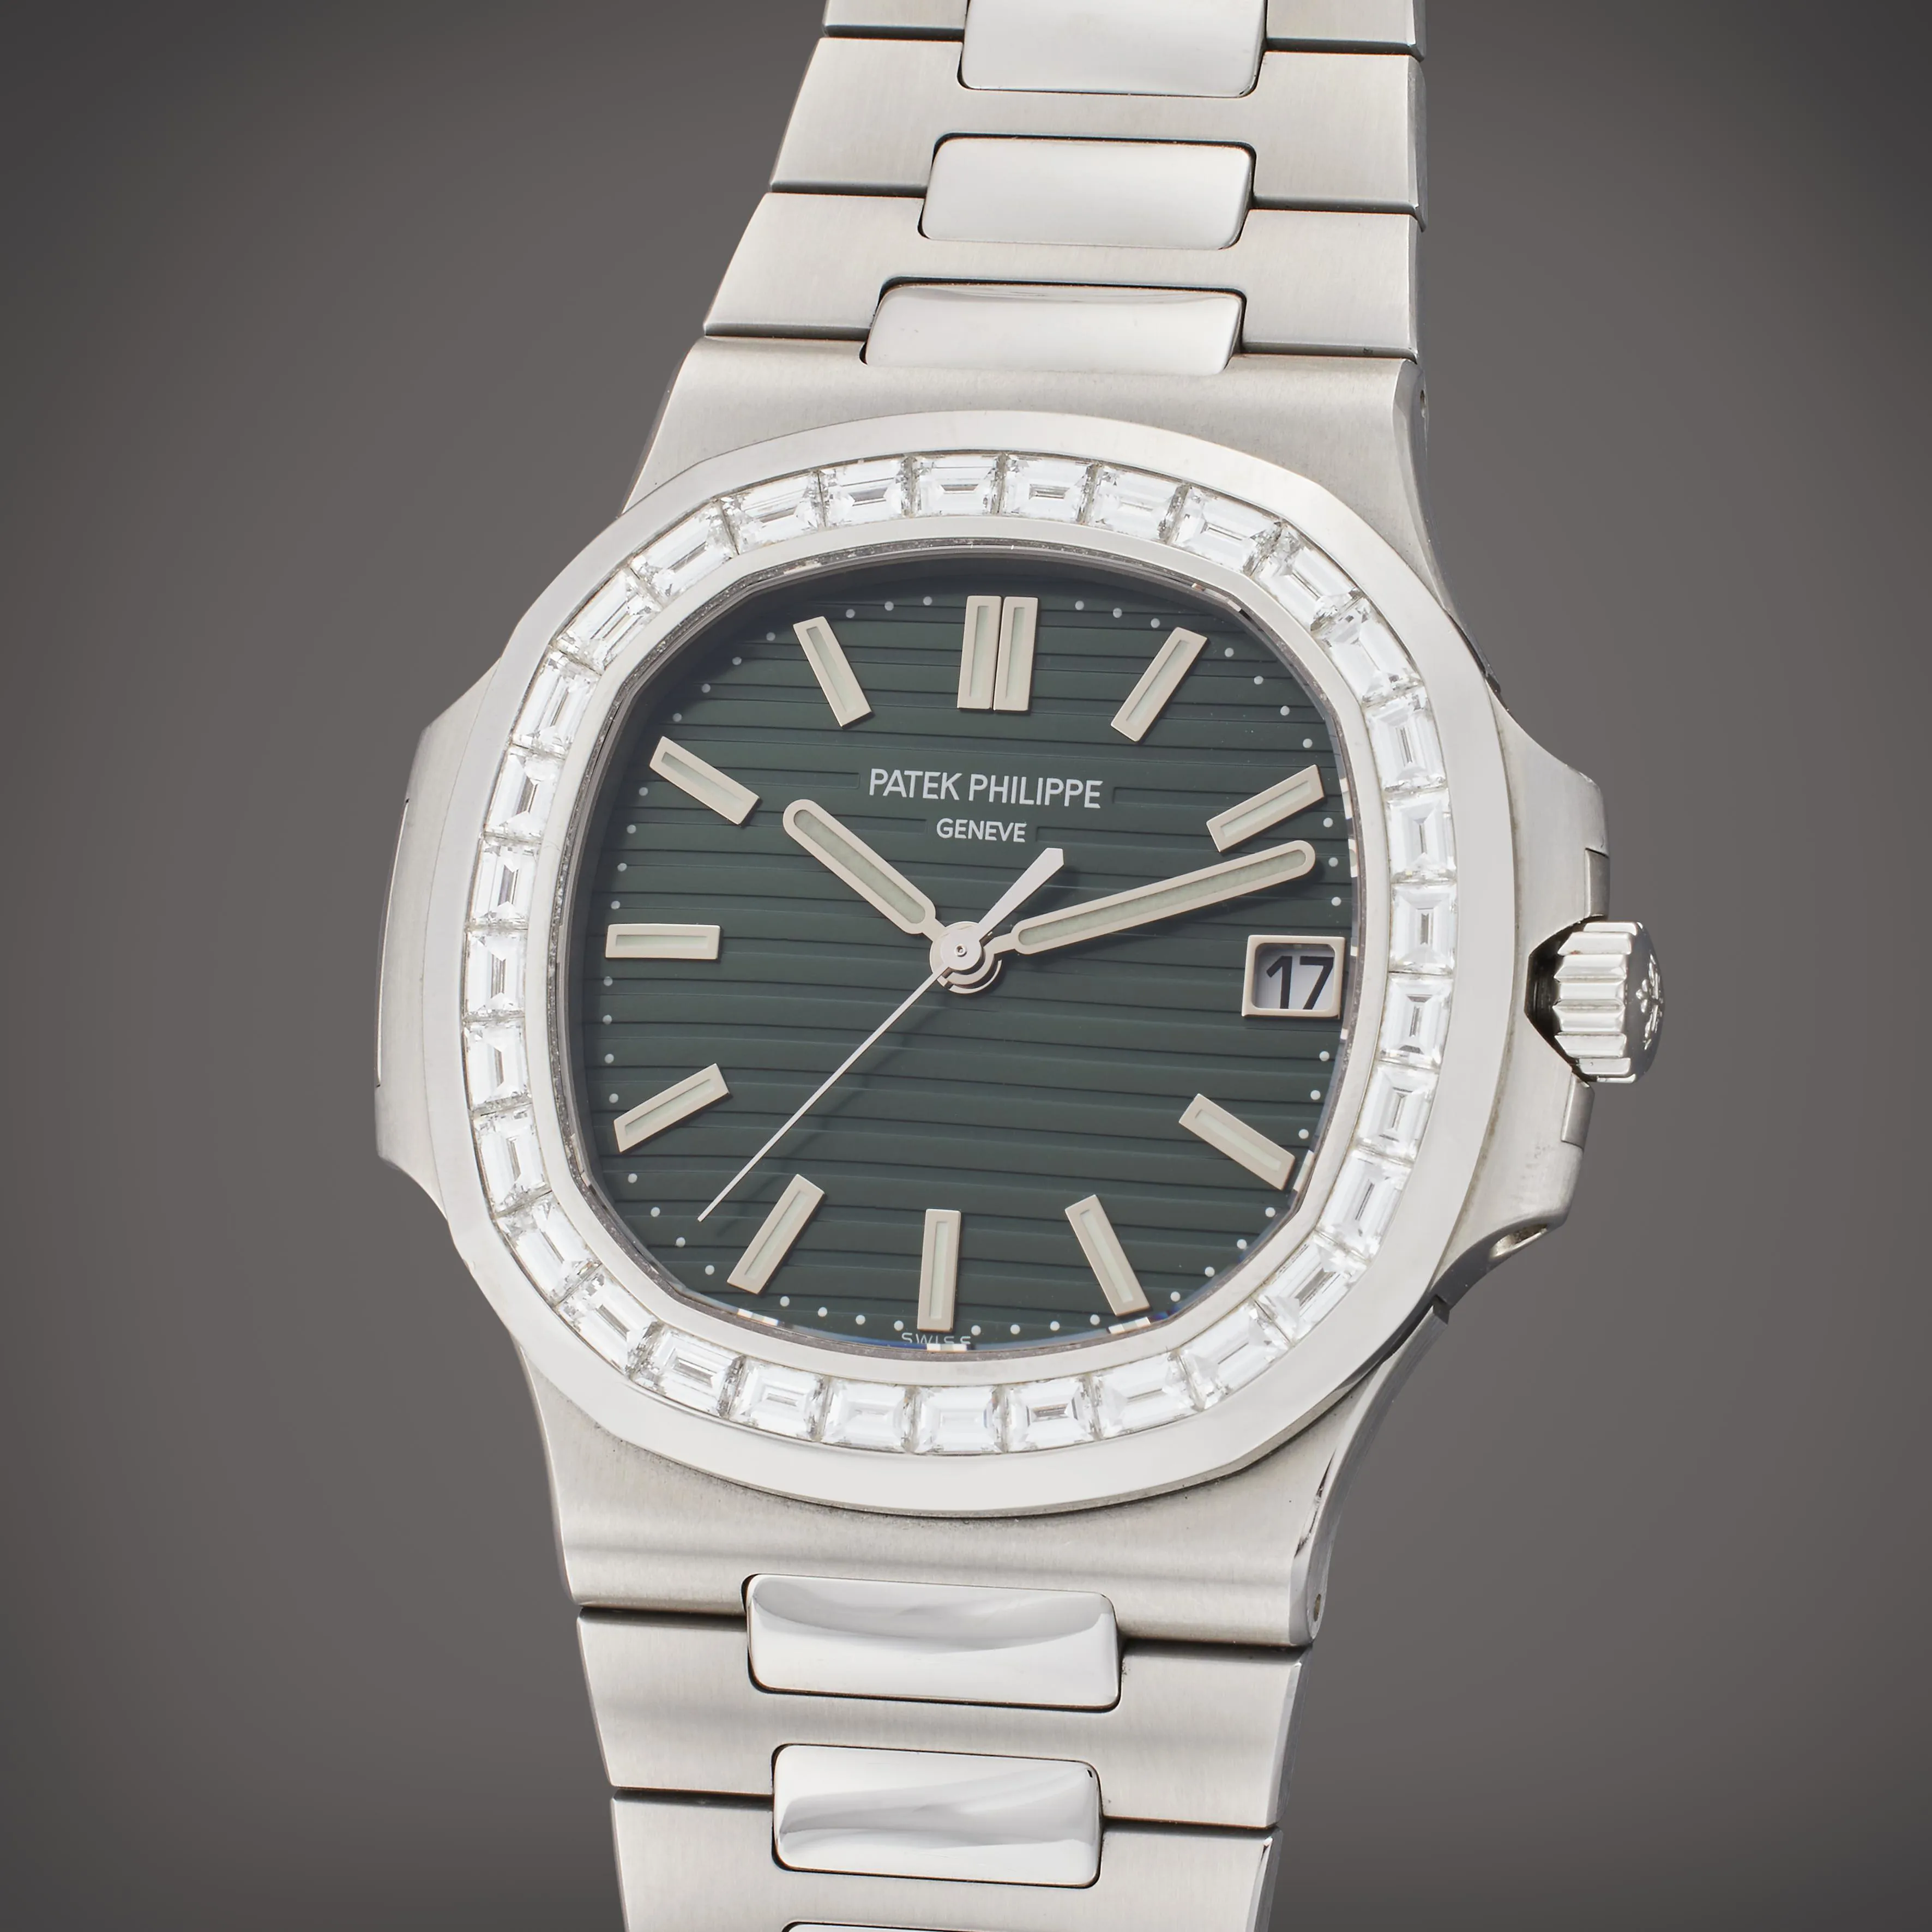 Patek Philippe Nautilus 5711/1300A-001 40mm Stainless steel and diamond-set Green